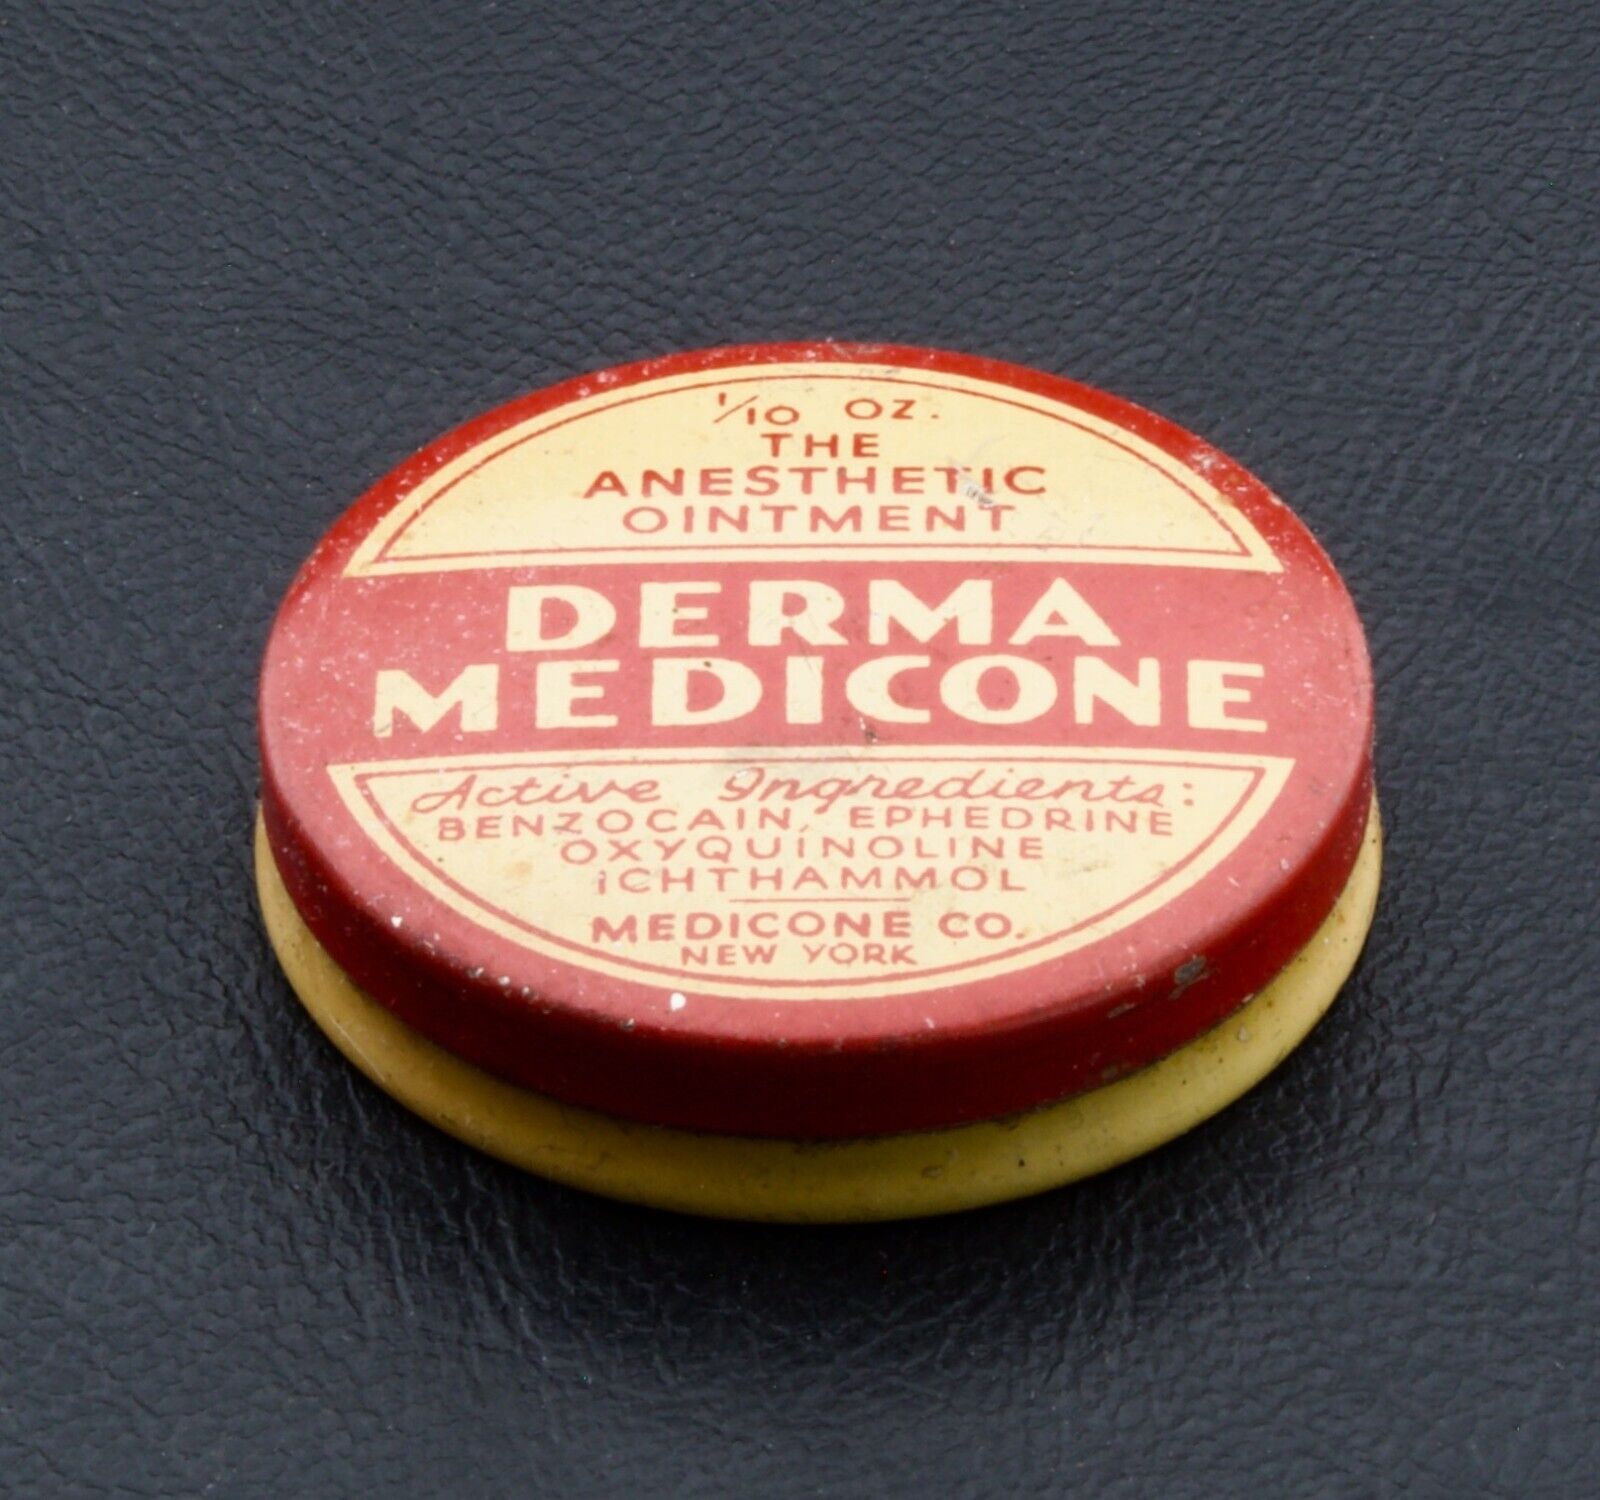 Vintage Derma Medicone Anesthetic Ointment Medical Advertising Tin New York